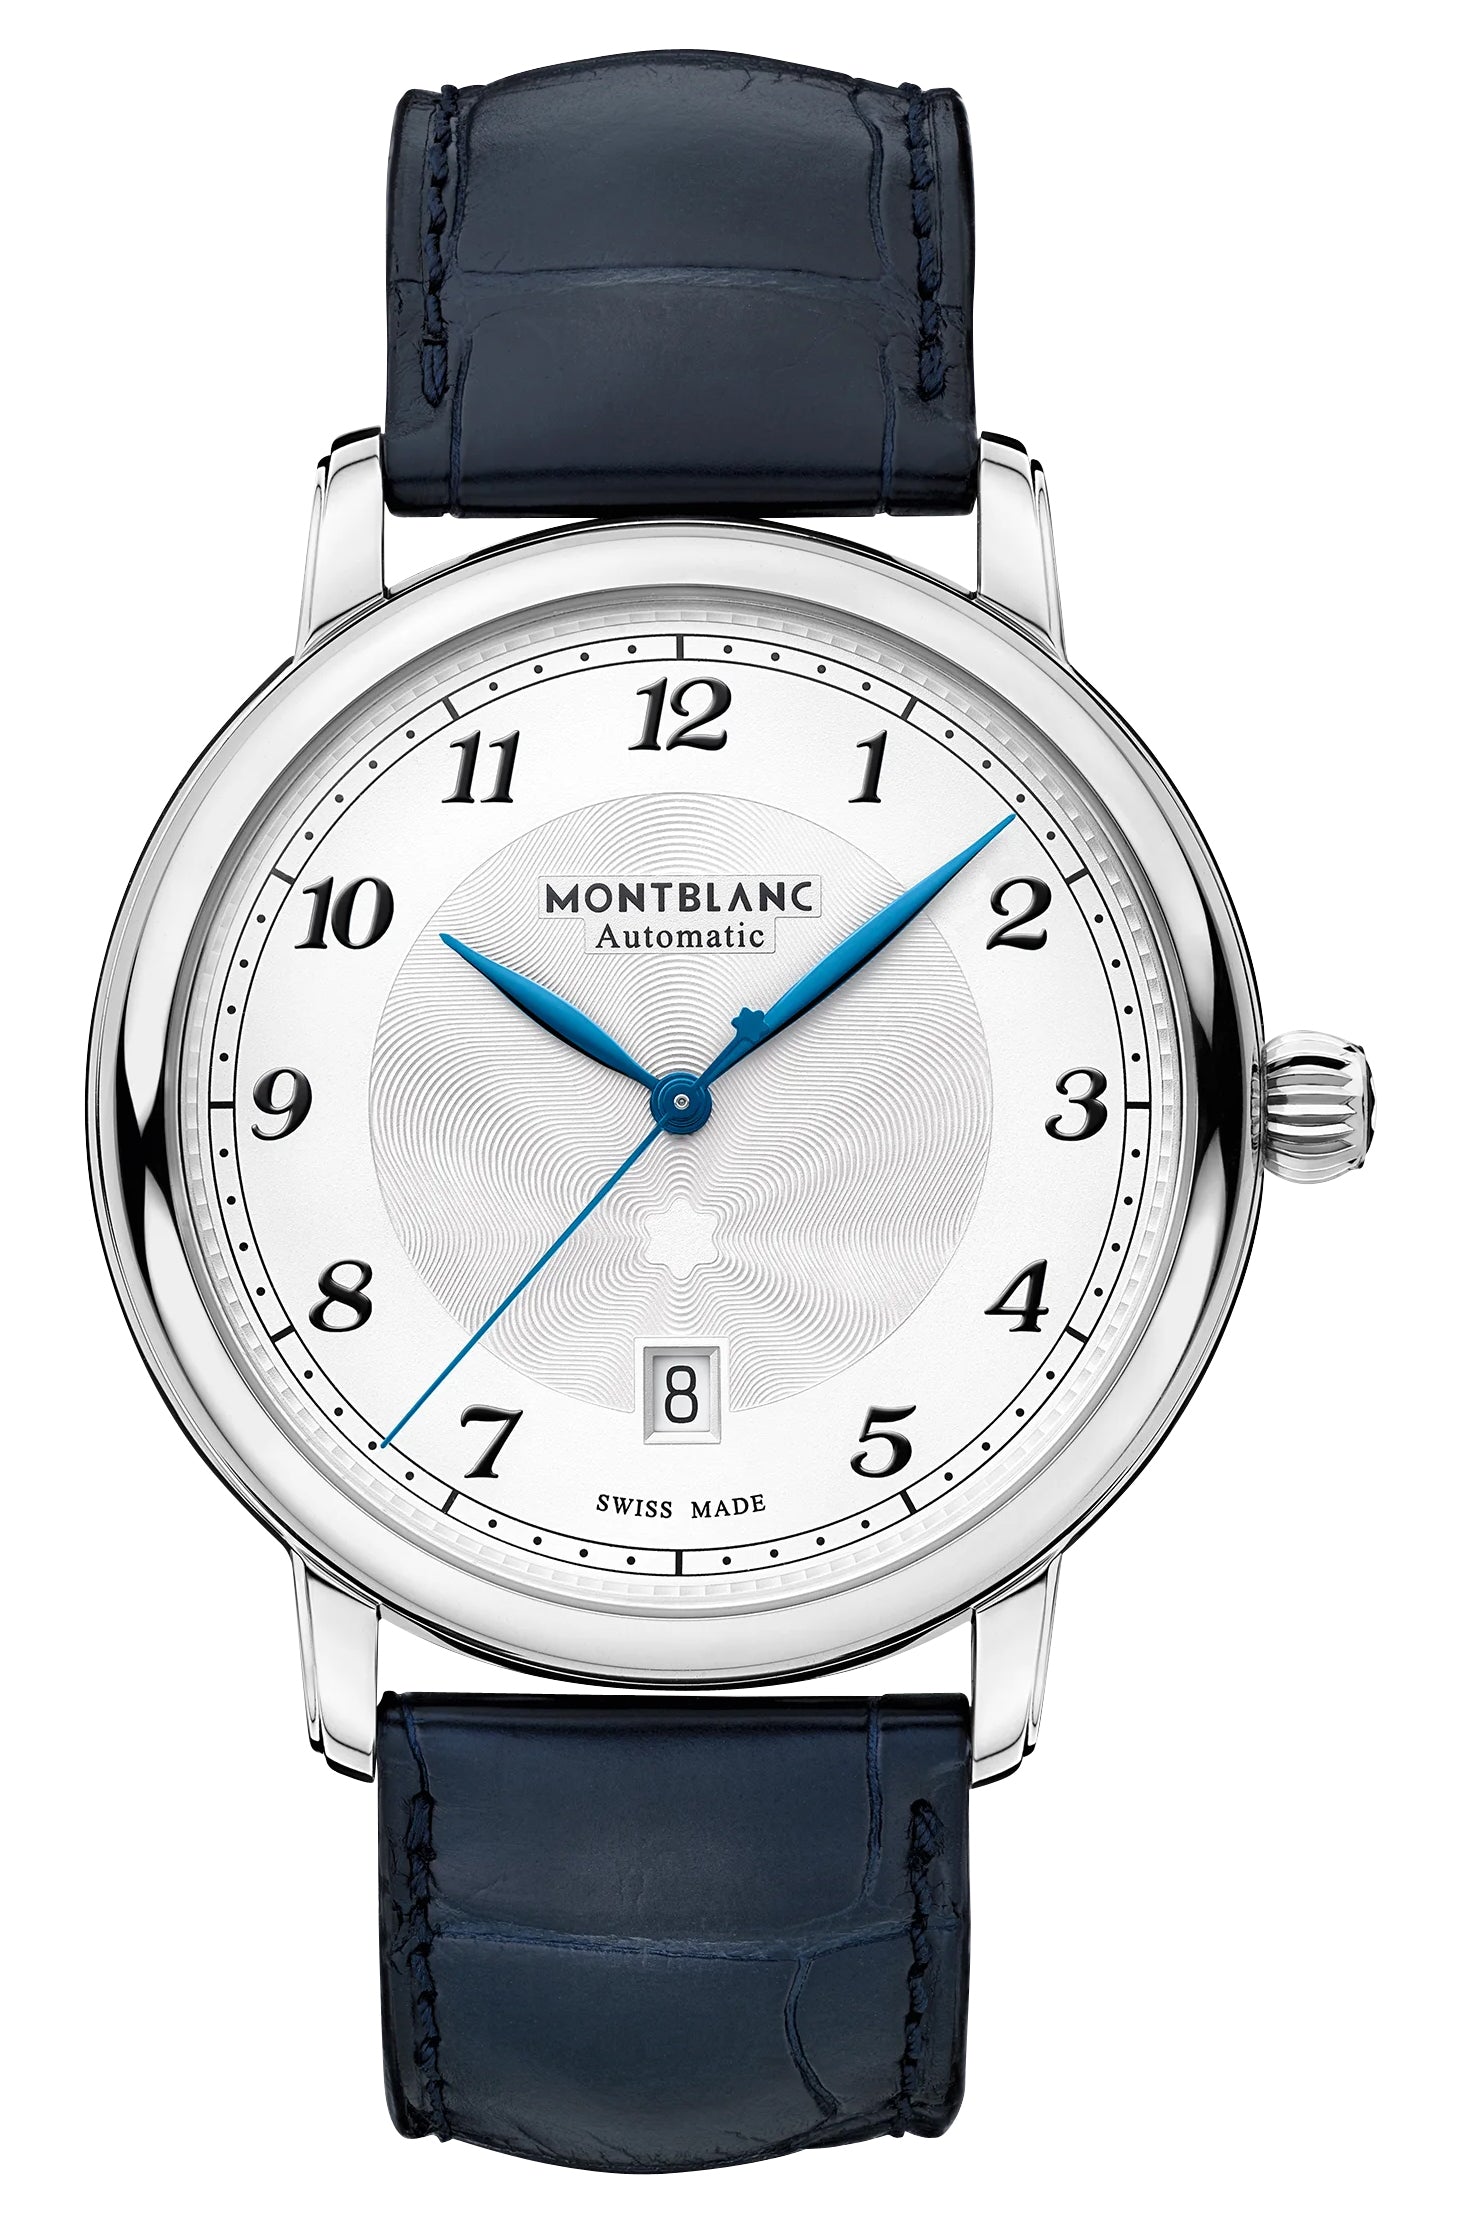 update alt-text with template Watches - Mens-Montblanc-117575-40 - 45 mm, date, leather, mens, menswatches, Montblanc, new arrivals, round, rpSKU_112609, rpSKU_112610, rpSKU_117323, rpSKU_117324, rpSKU_117830, silver-tone, stainless steel case, Star Legacy, swiss automatic, watches-Watches & Beyond